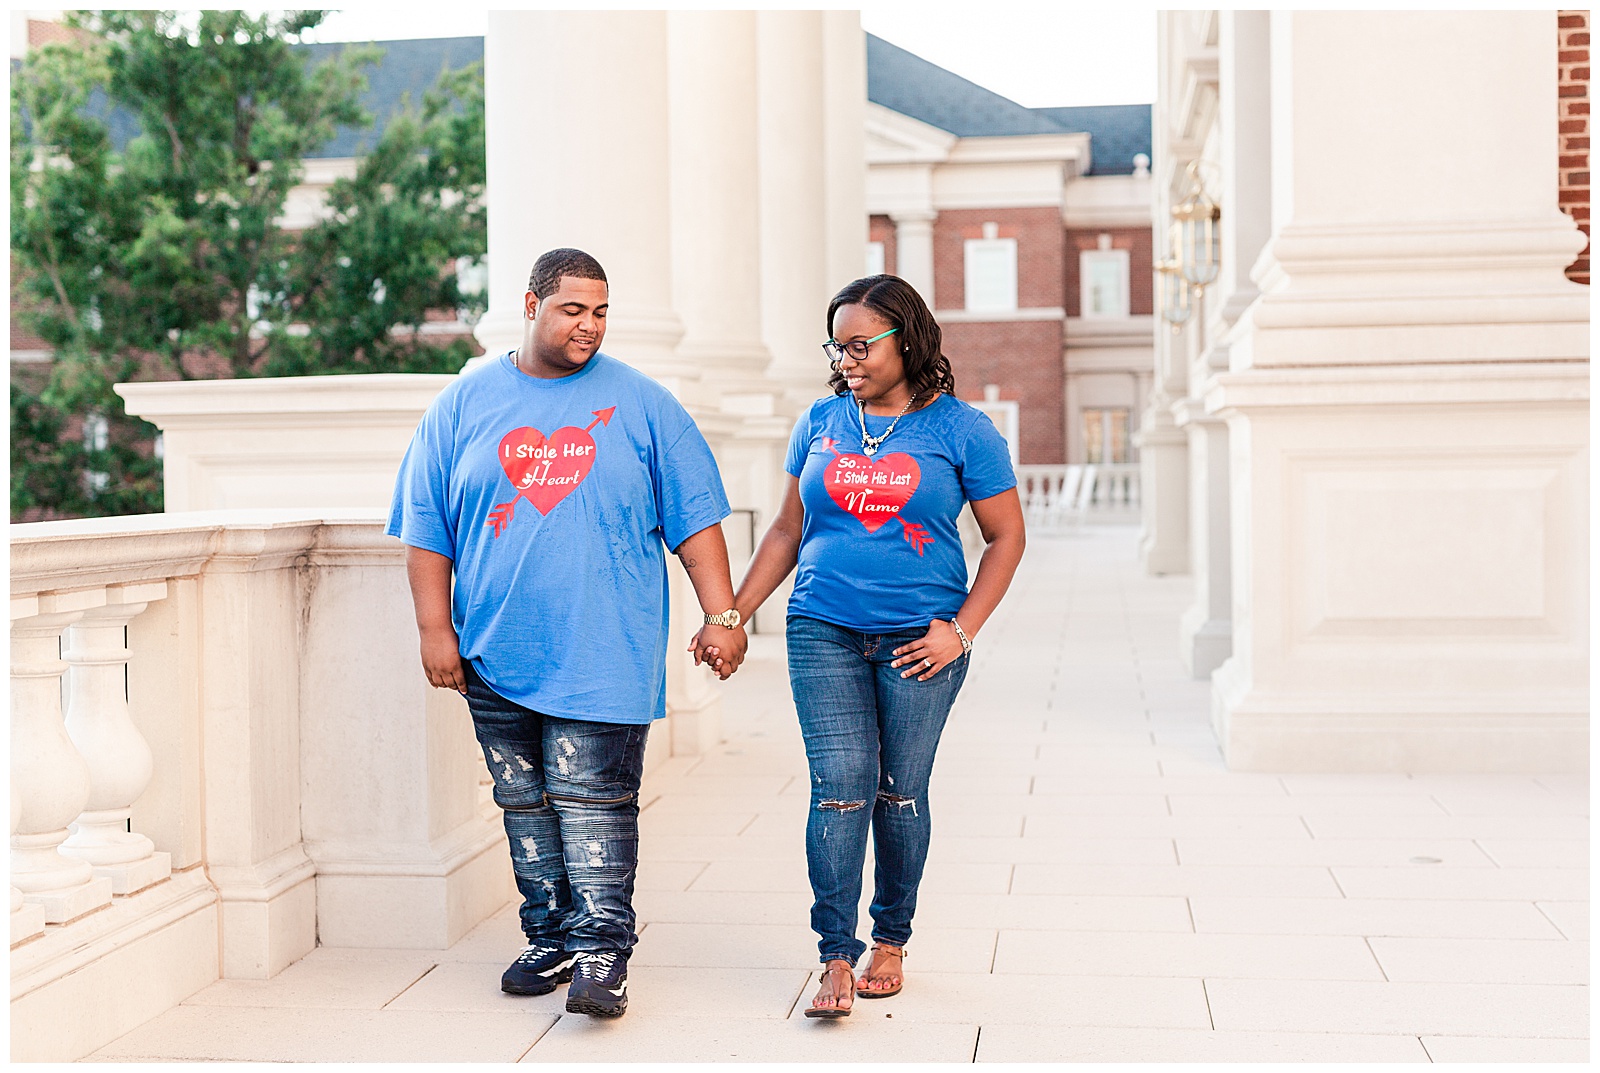 cnu-summer-engagement-session-charneice-kevin-25.jpg